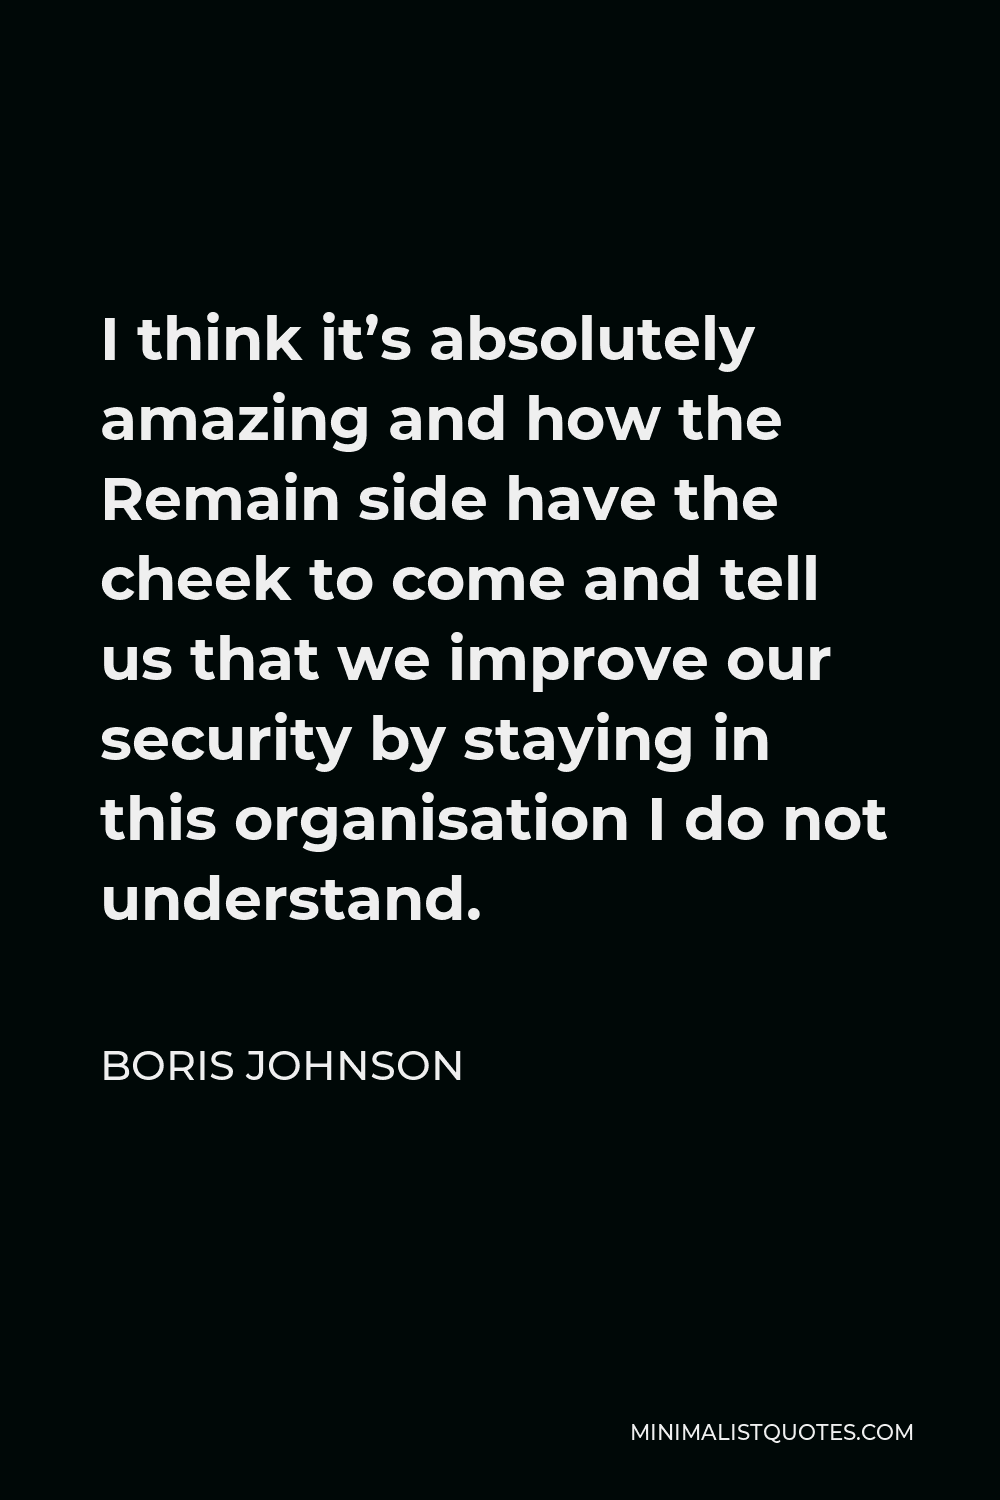 Boris Johnson Quote - I think it’s absolutely amazing and how the Remain side have the cheek to come and tell us that we improve our security by staying in this organisation I do not understand.